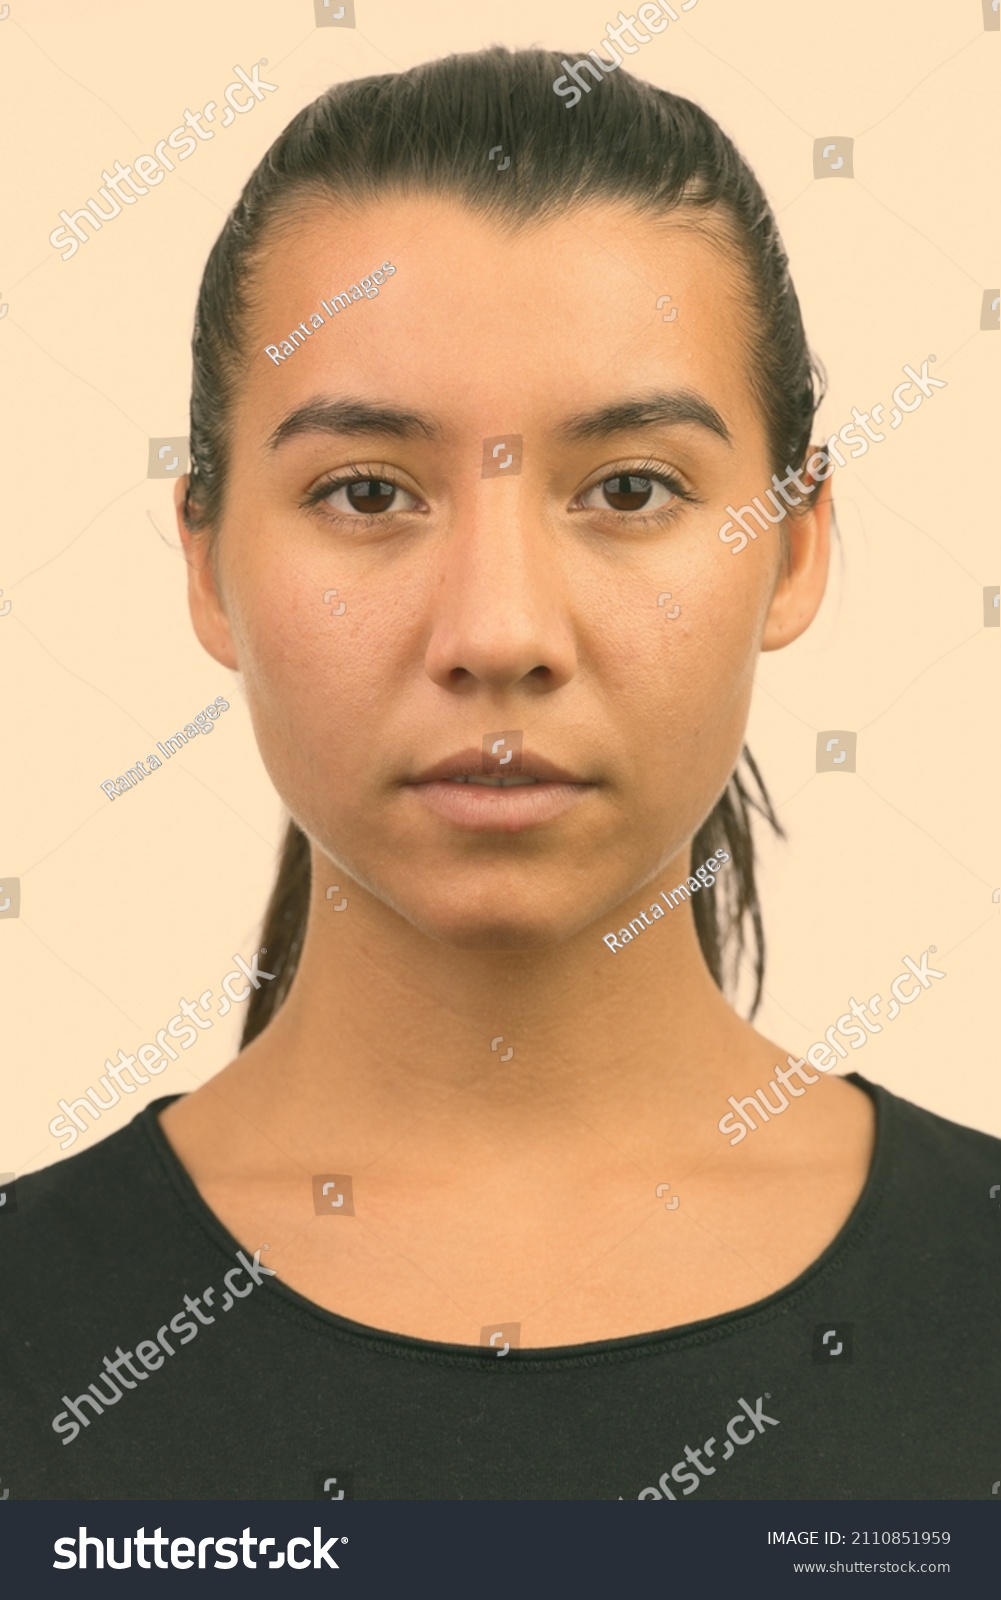 Portrait of young beautiful woman shot against studio background #2110851959